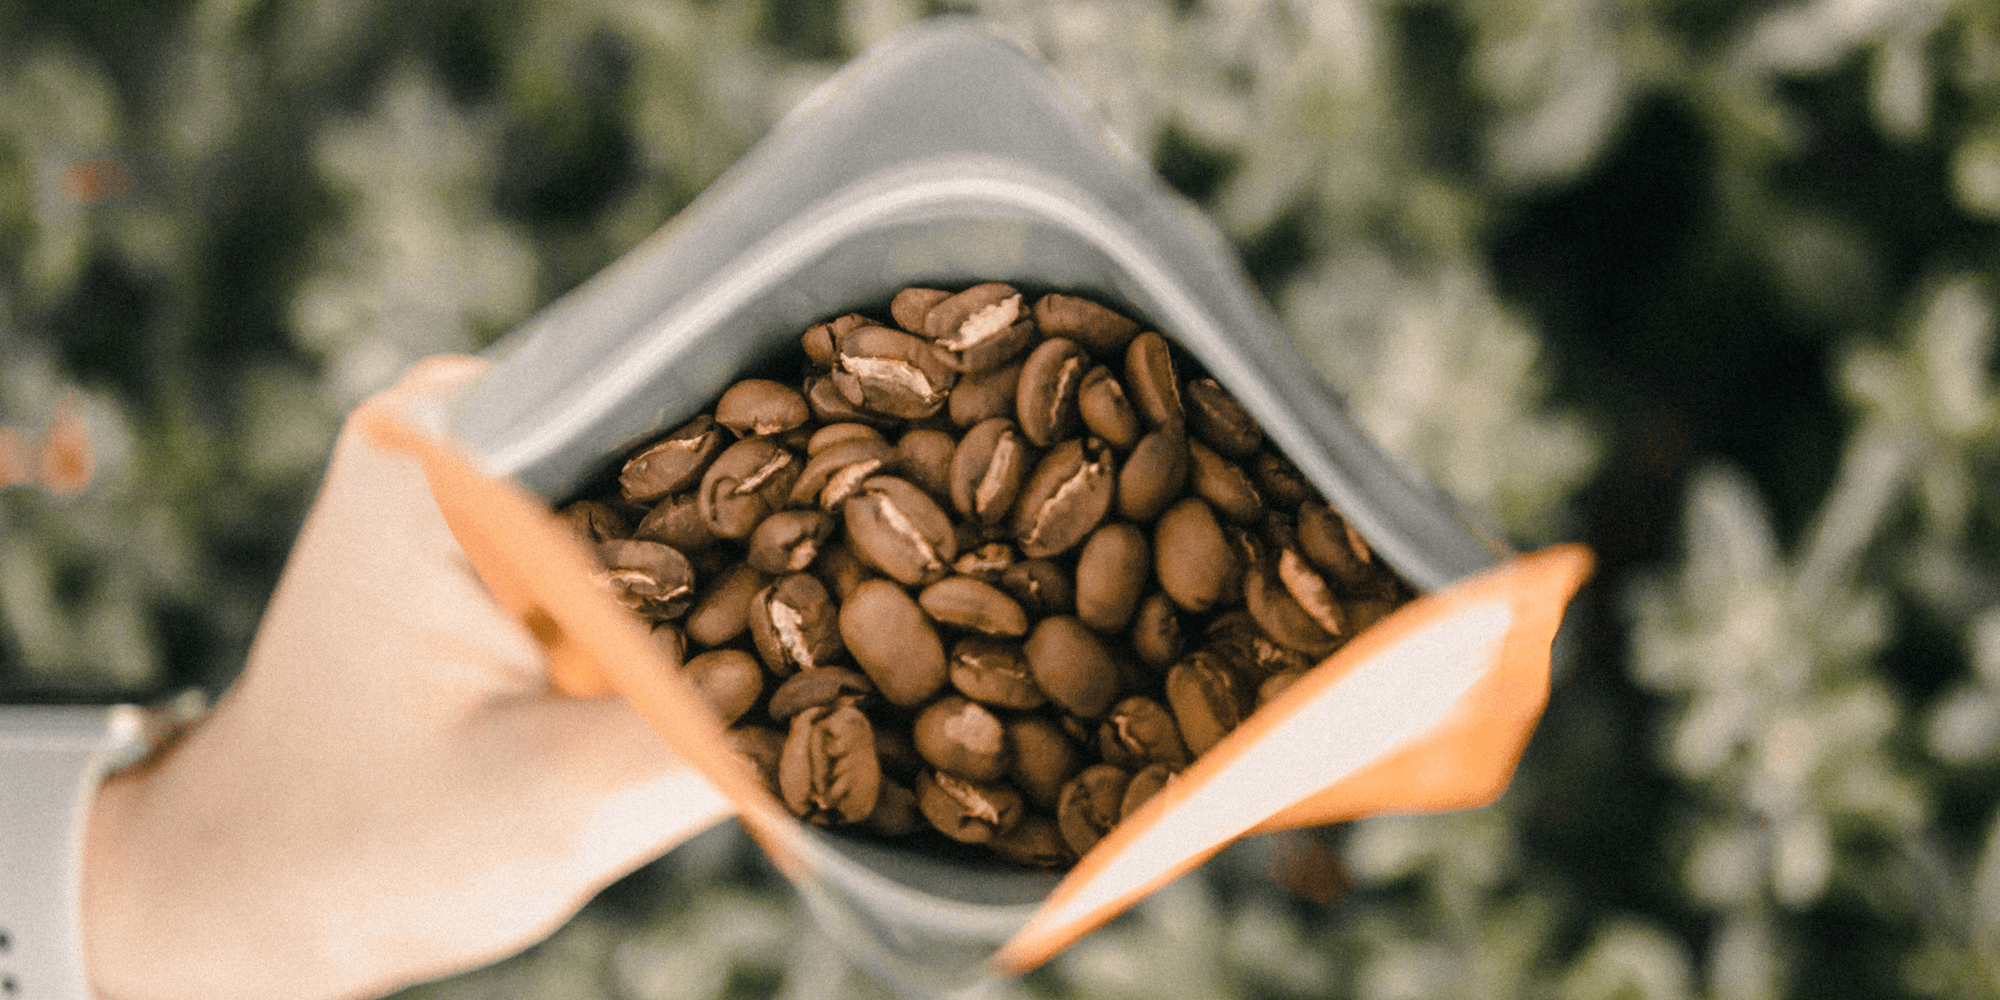 Storing coffee at home